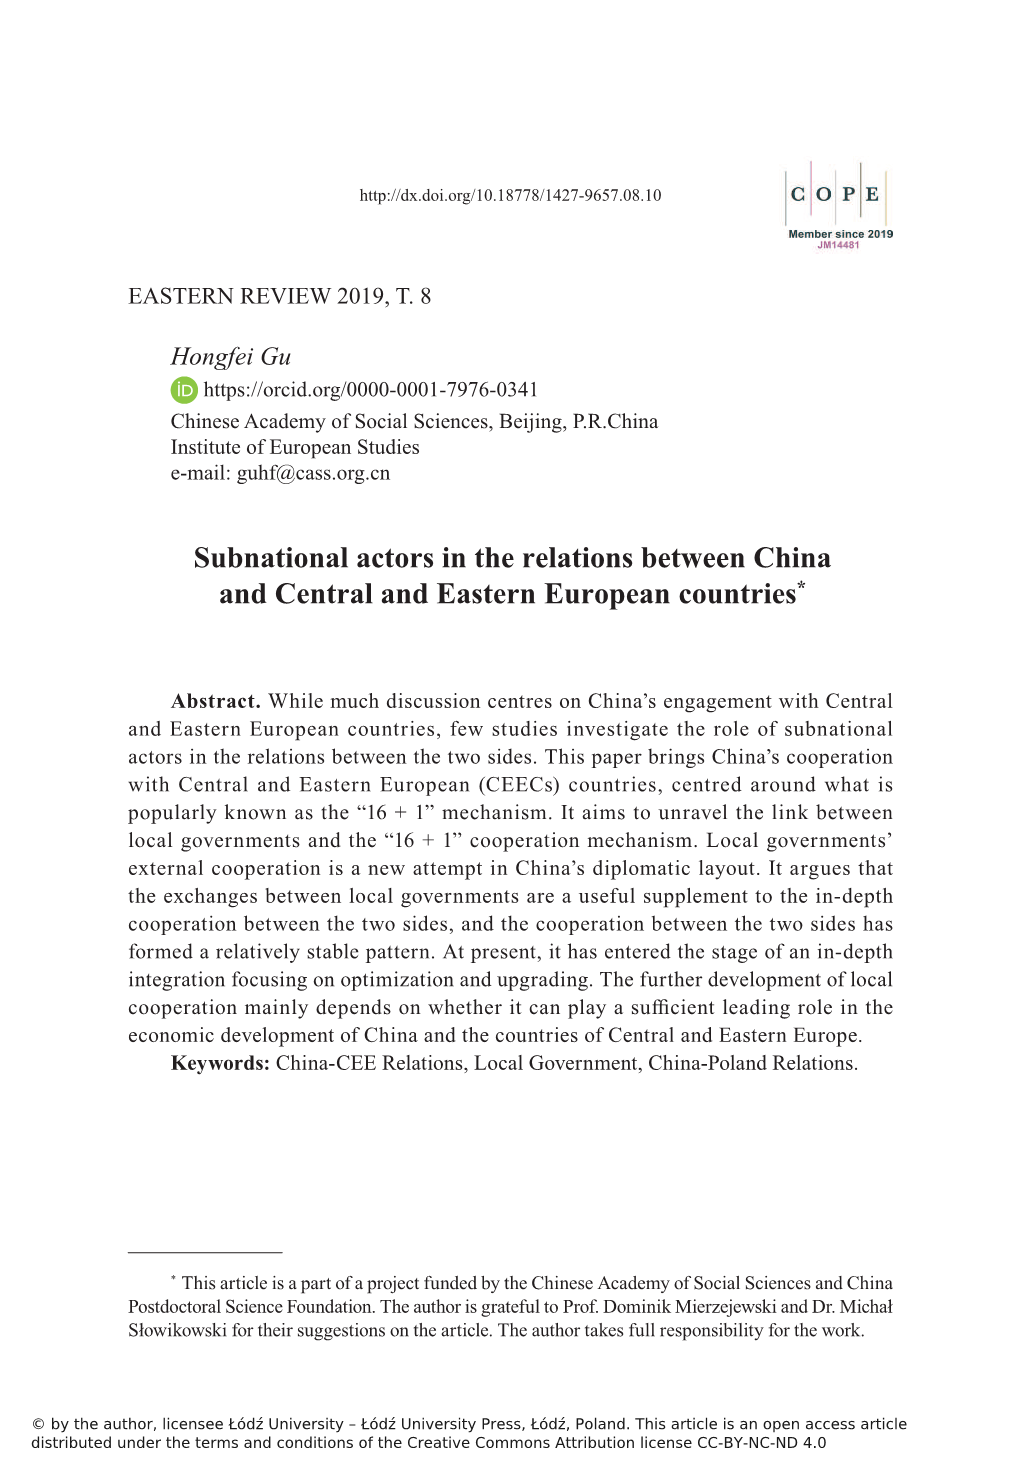 Subnational Actors in the Relations Between China and Central and Eastern European Countries*